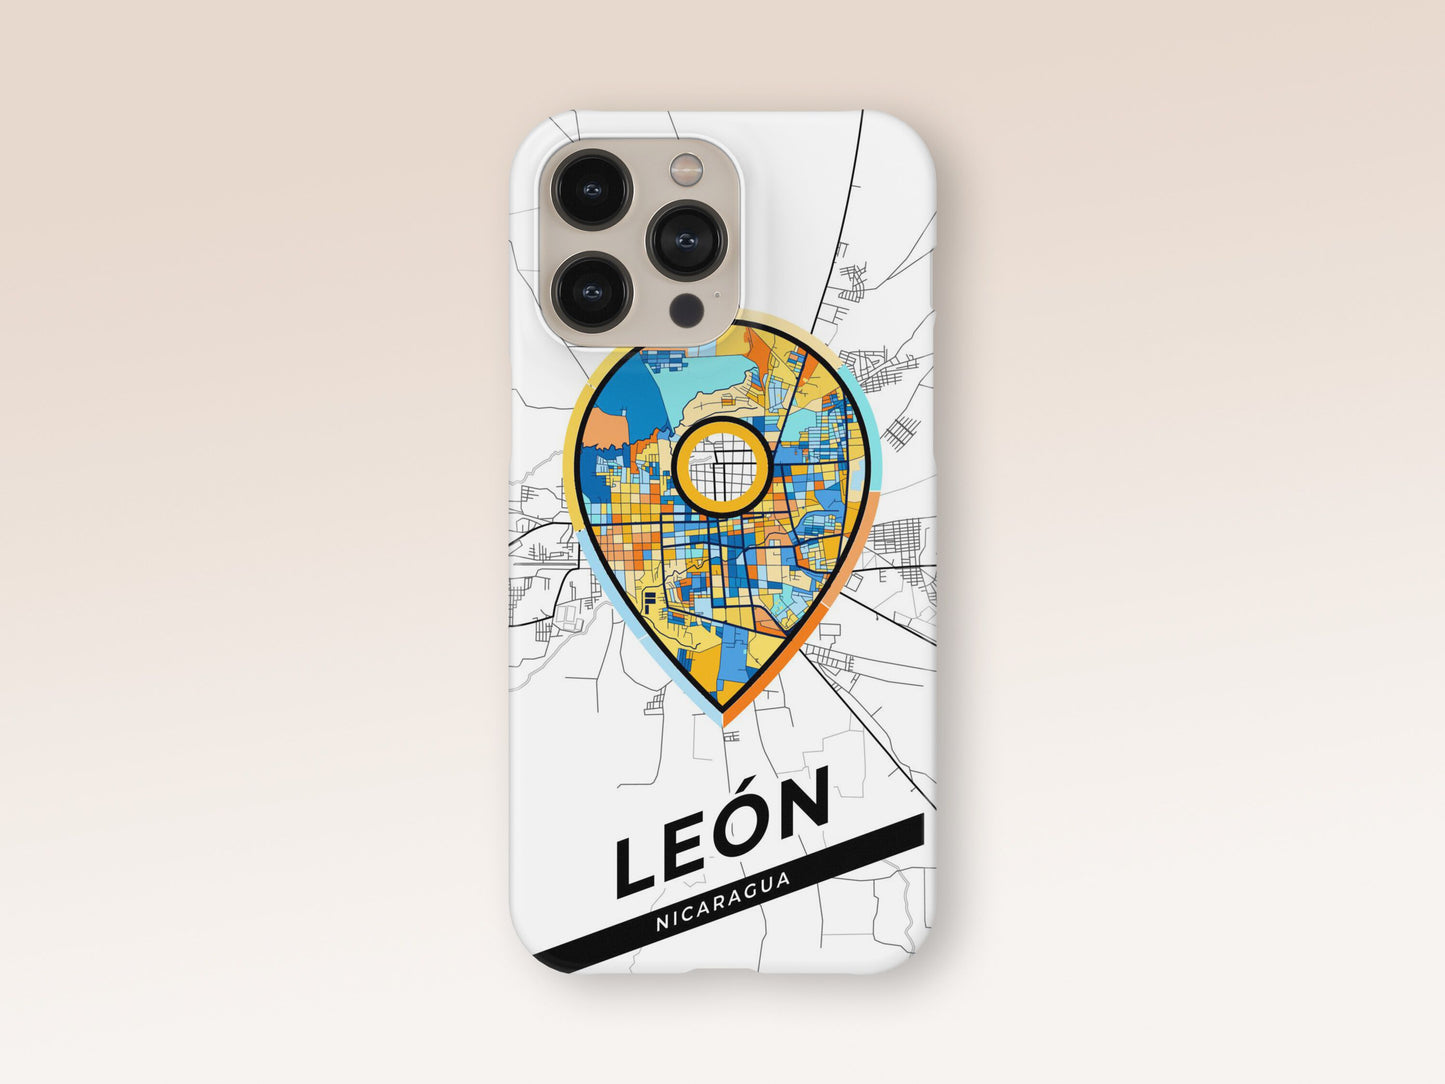 León Nicaragua slim phone case with colorful icon. Birthday, wedding or housewarming gift. Couple match cases. 1